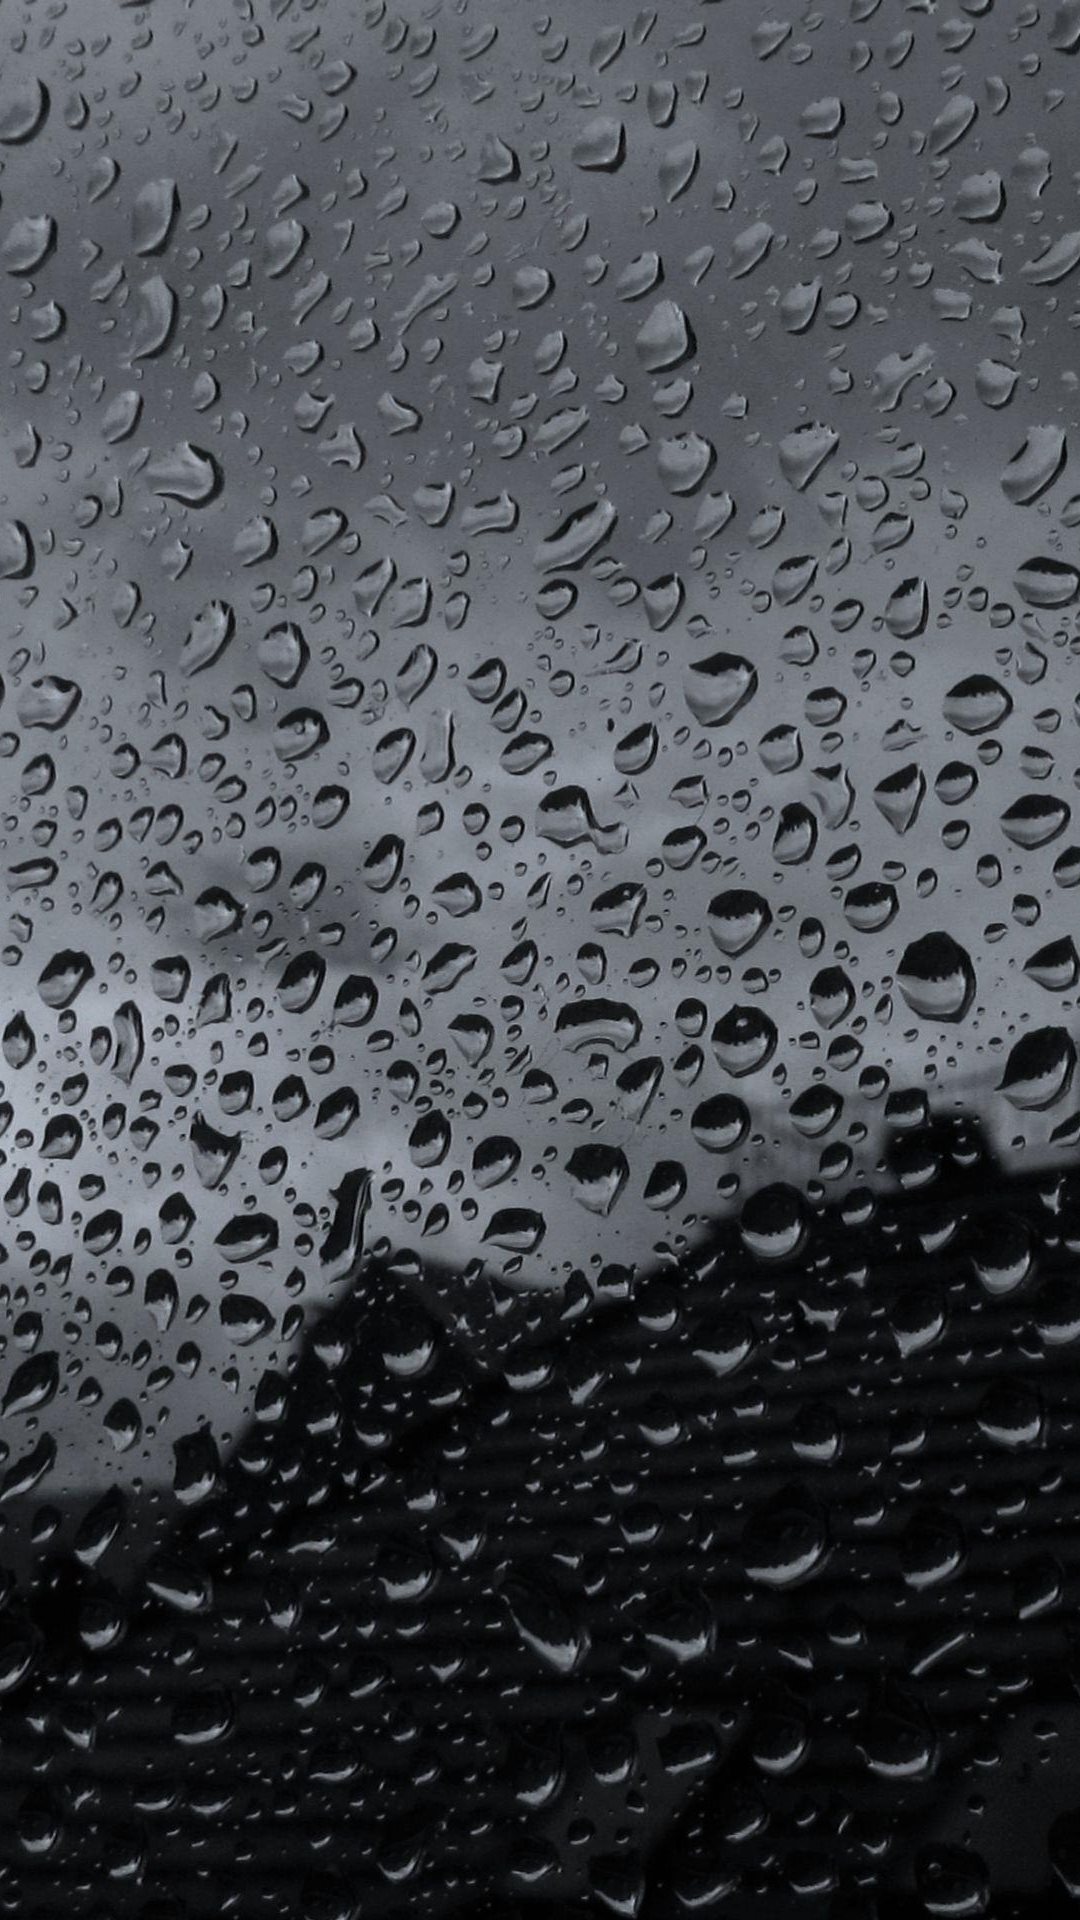 Drops On Glass Black And White Android Wallpaper Free - Phone Wallpapers Black And White - HD Wallpaper 